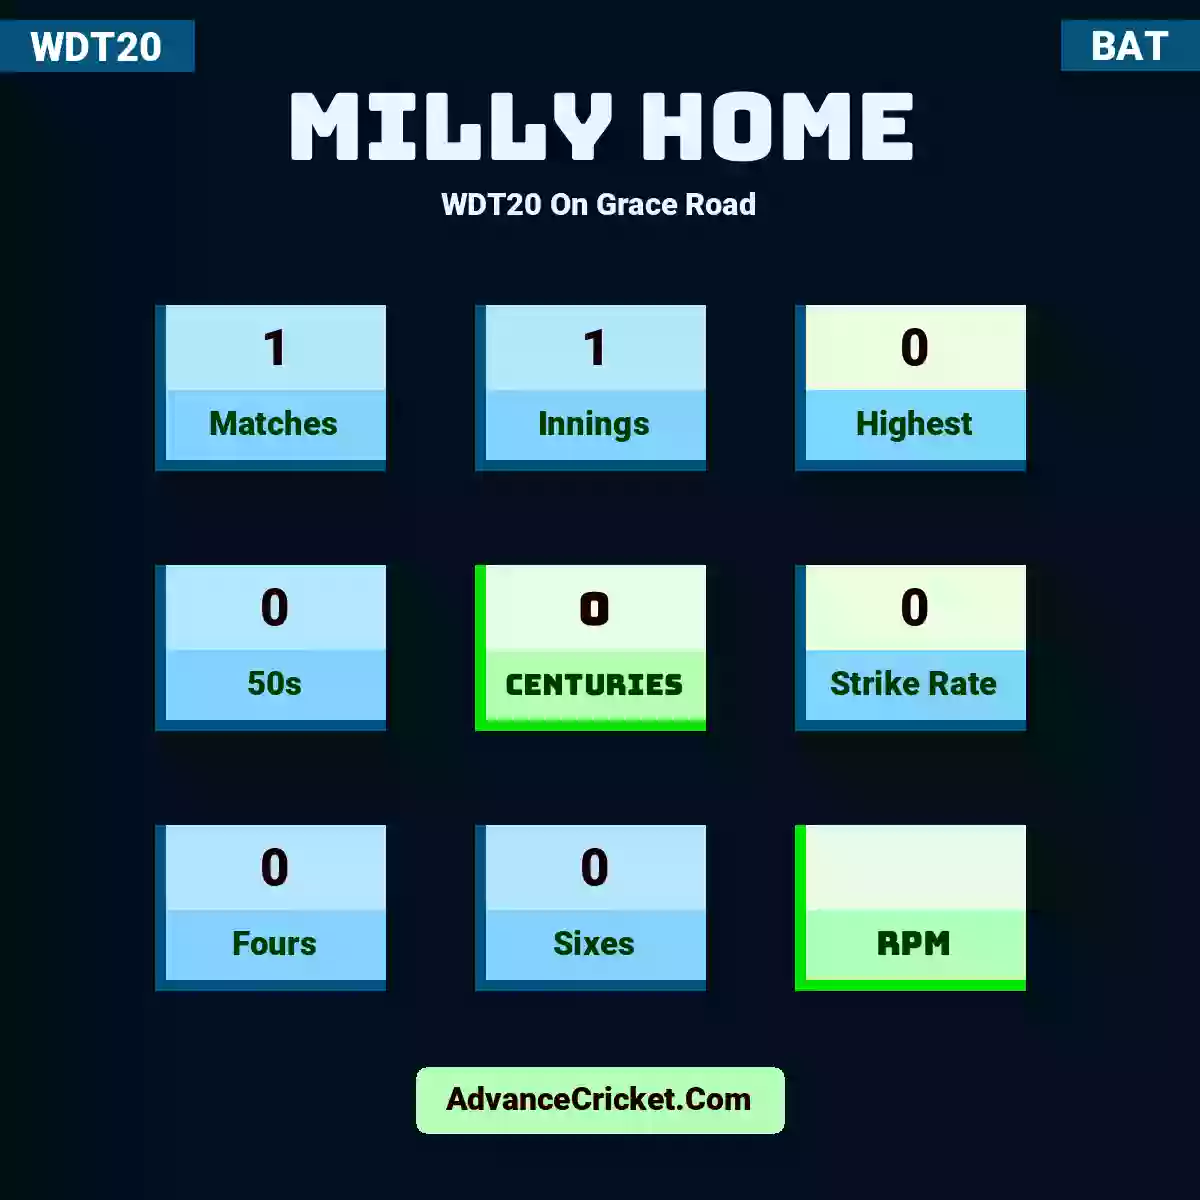 Milly Home WDT20  On Grace Road, Milly Home played 1 matches, scored 0 runs as highest, 0 half-centuries, and 0 centuries, with a strike rate of 0. M.Home hit 0 fours and 0 sixes.